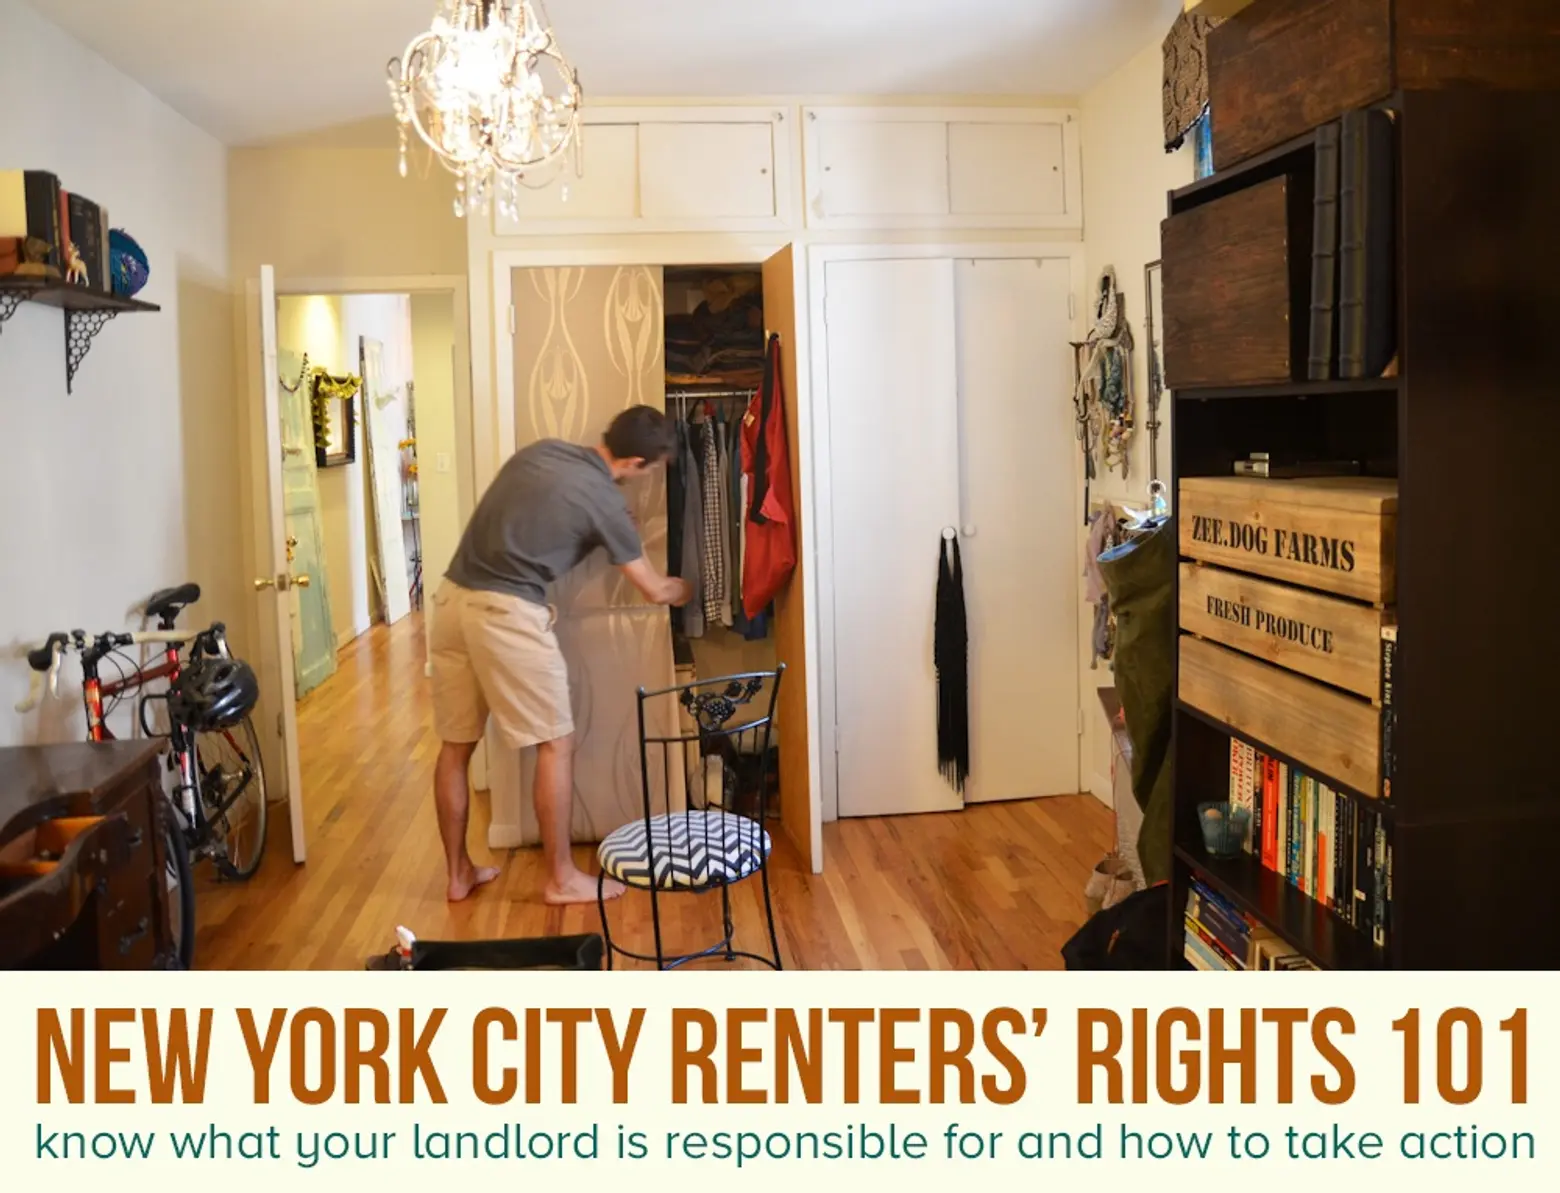 Renters’ Rights 101: Know what your landlord is responsible for